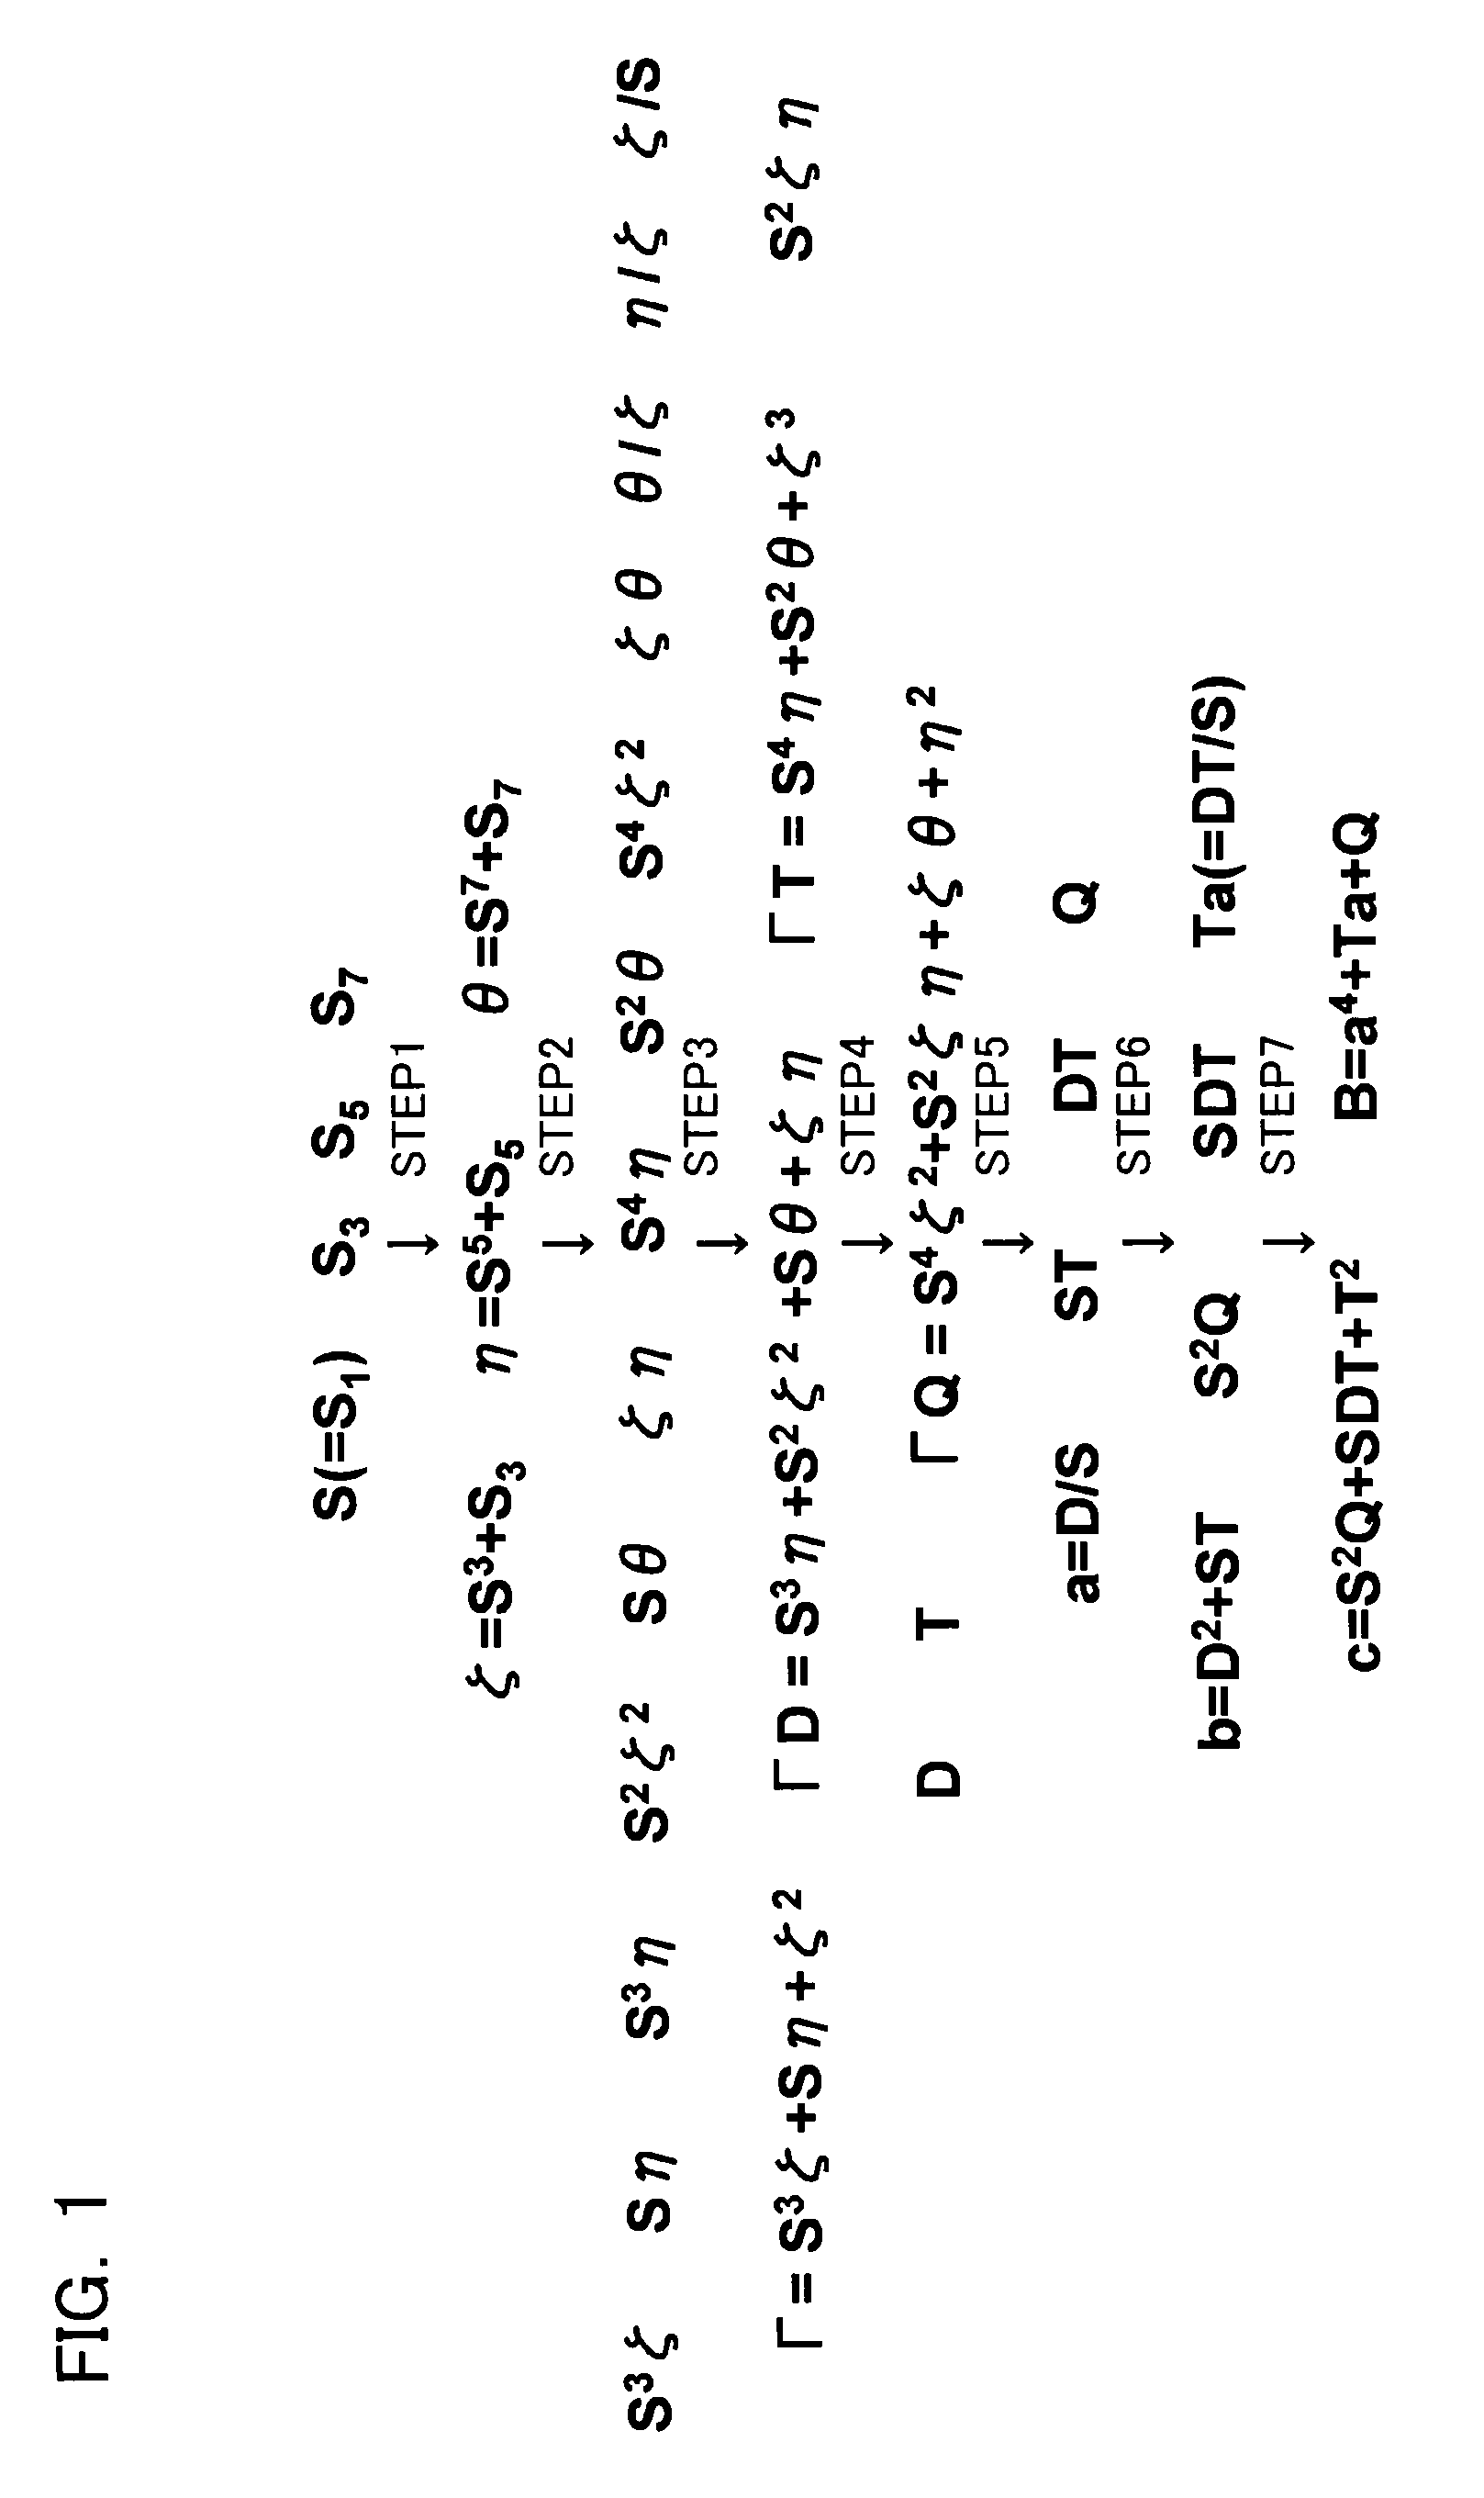 Memory device with error correction system